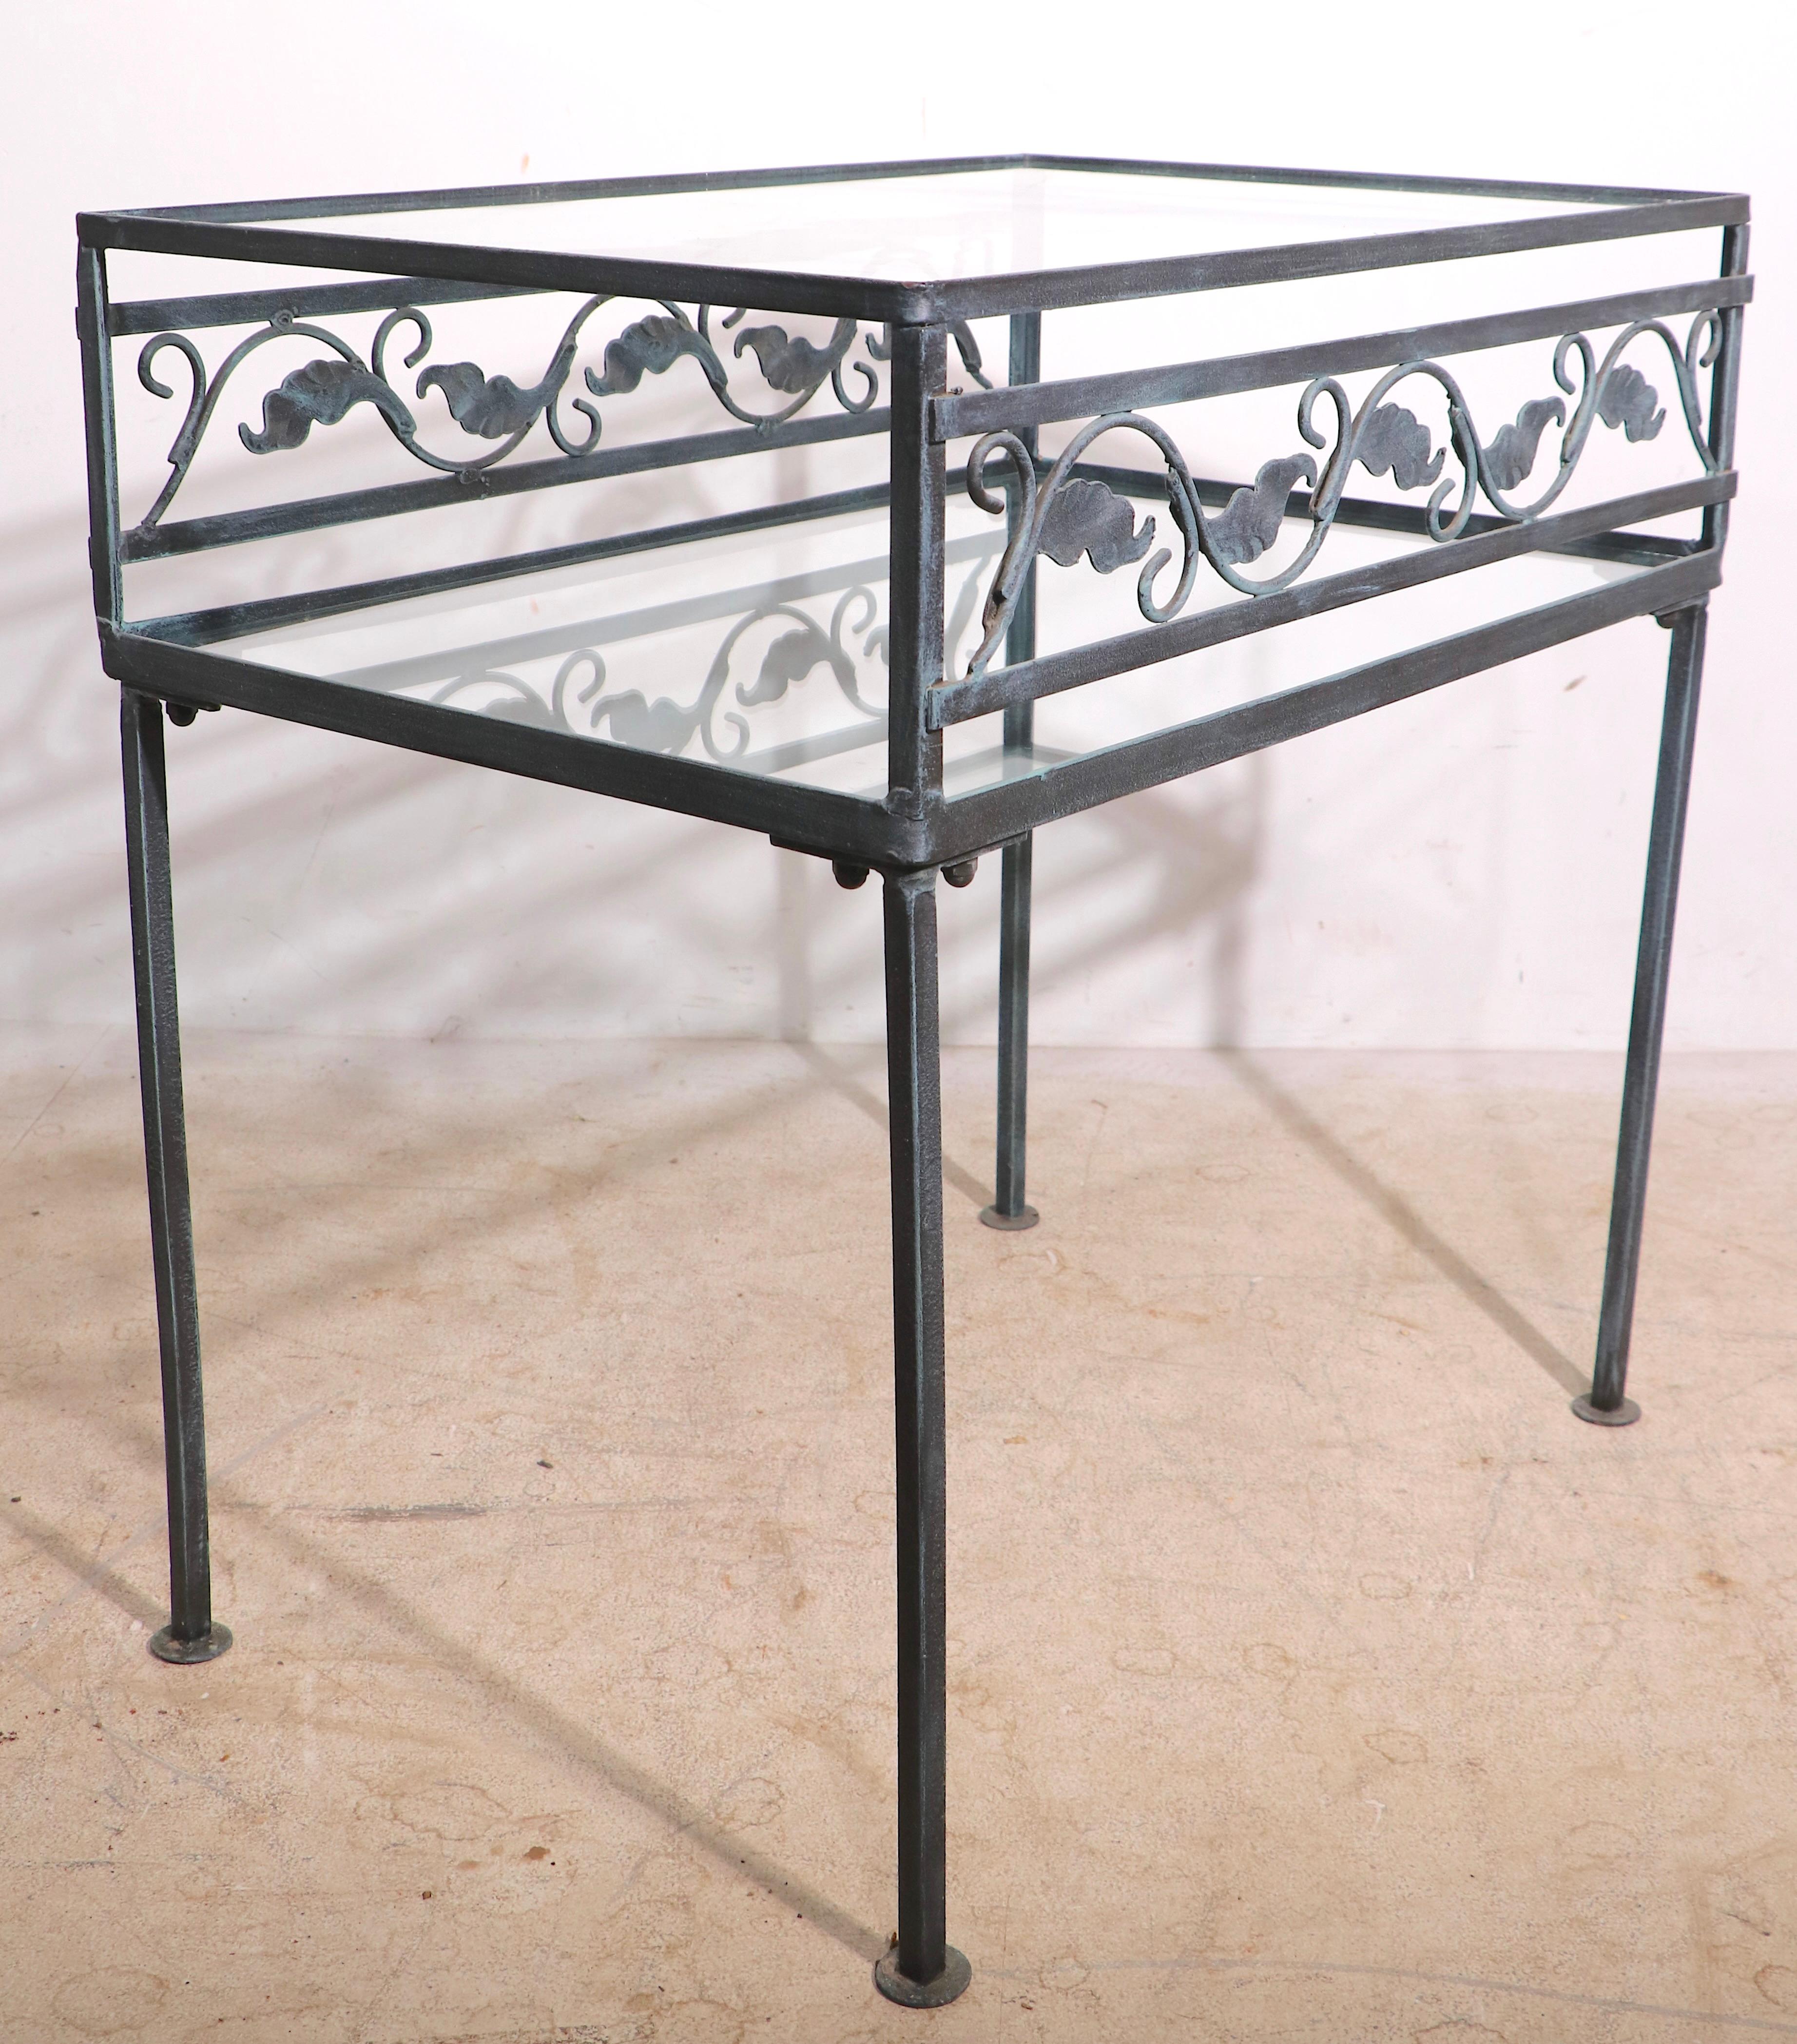 Mid-Century Modern Wrought Iron and Glass Two Tier Garden Patio Table by Meadowcraft For Sale